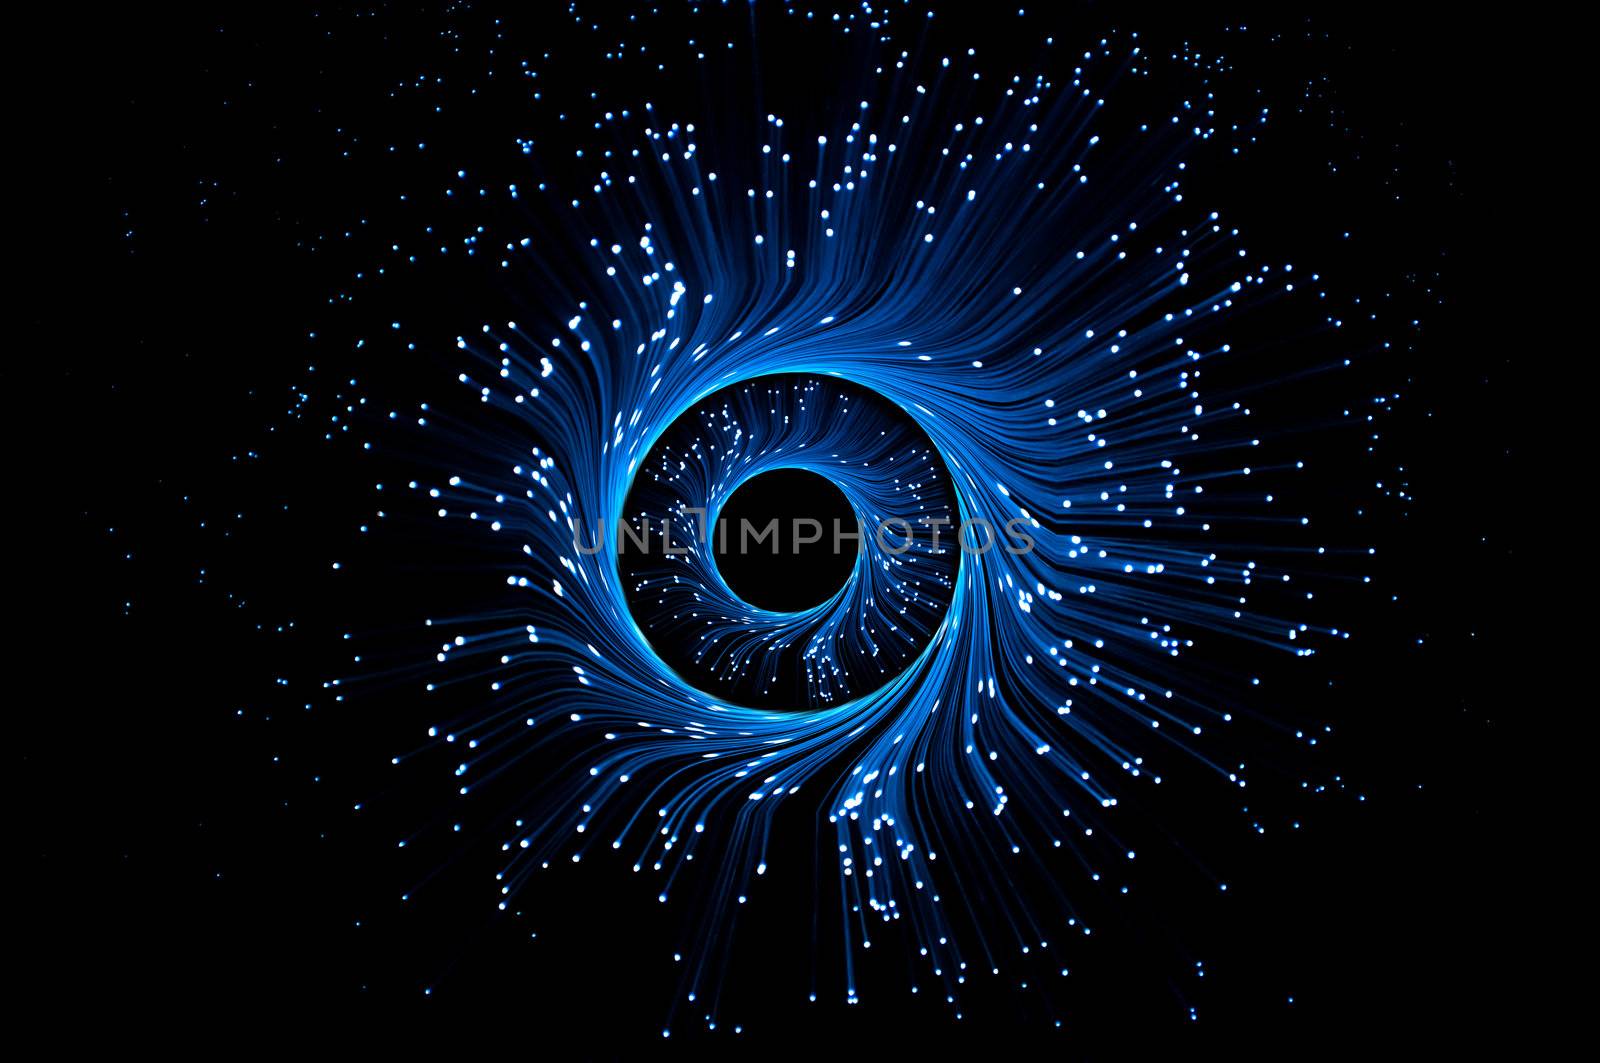 Illuminated blue fibre optic light strands forming swirling rings against a black background.